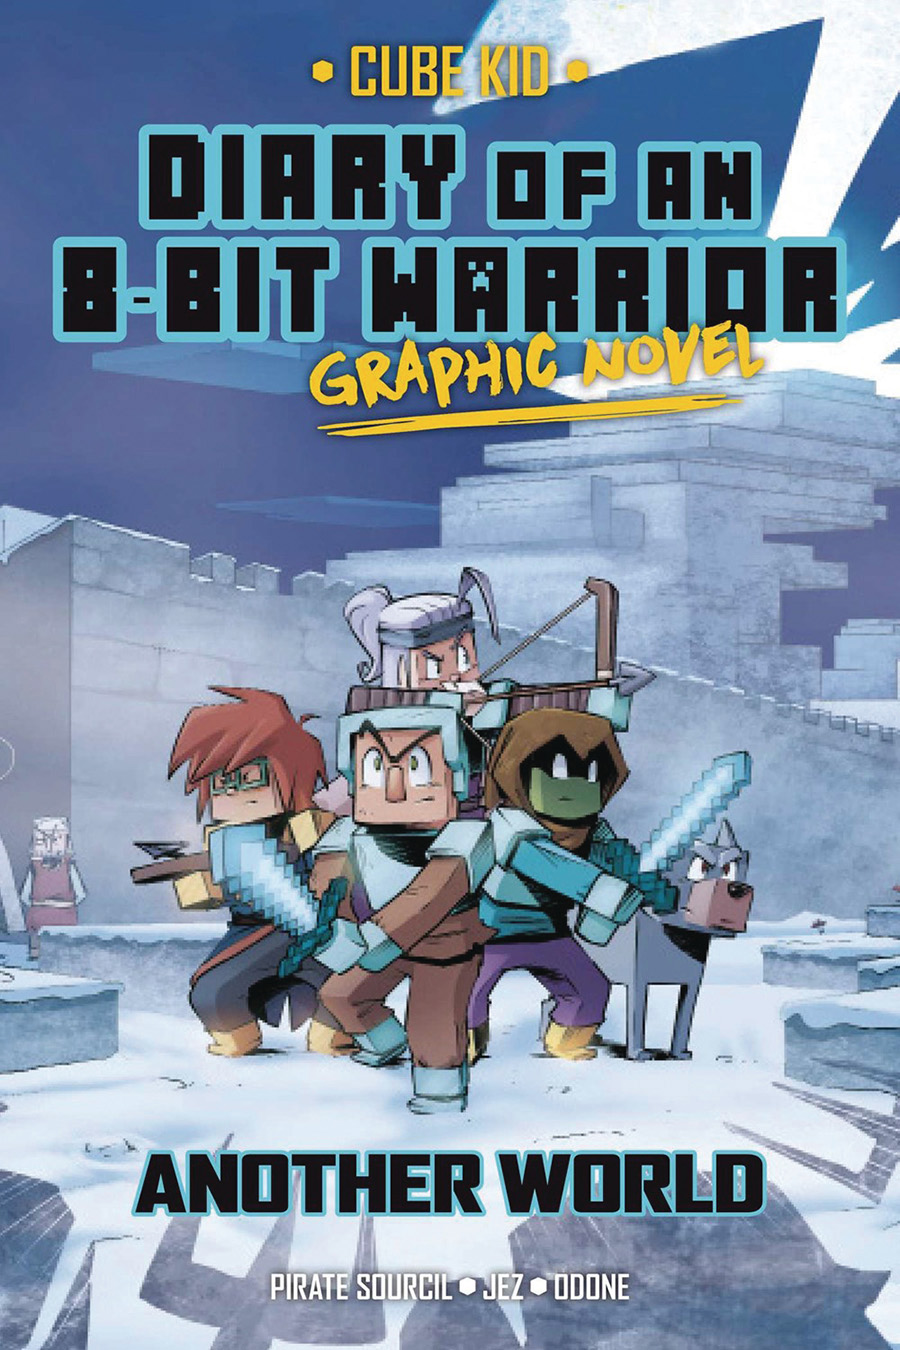 Diary Of An 8-Bit Warrior Graphic Novel Vol 3 Another World TP